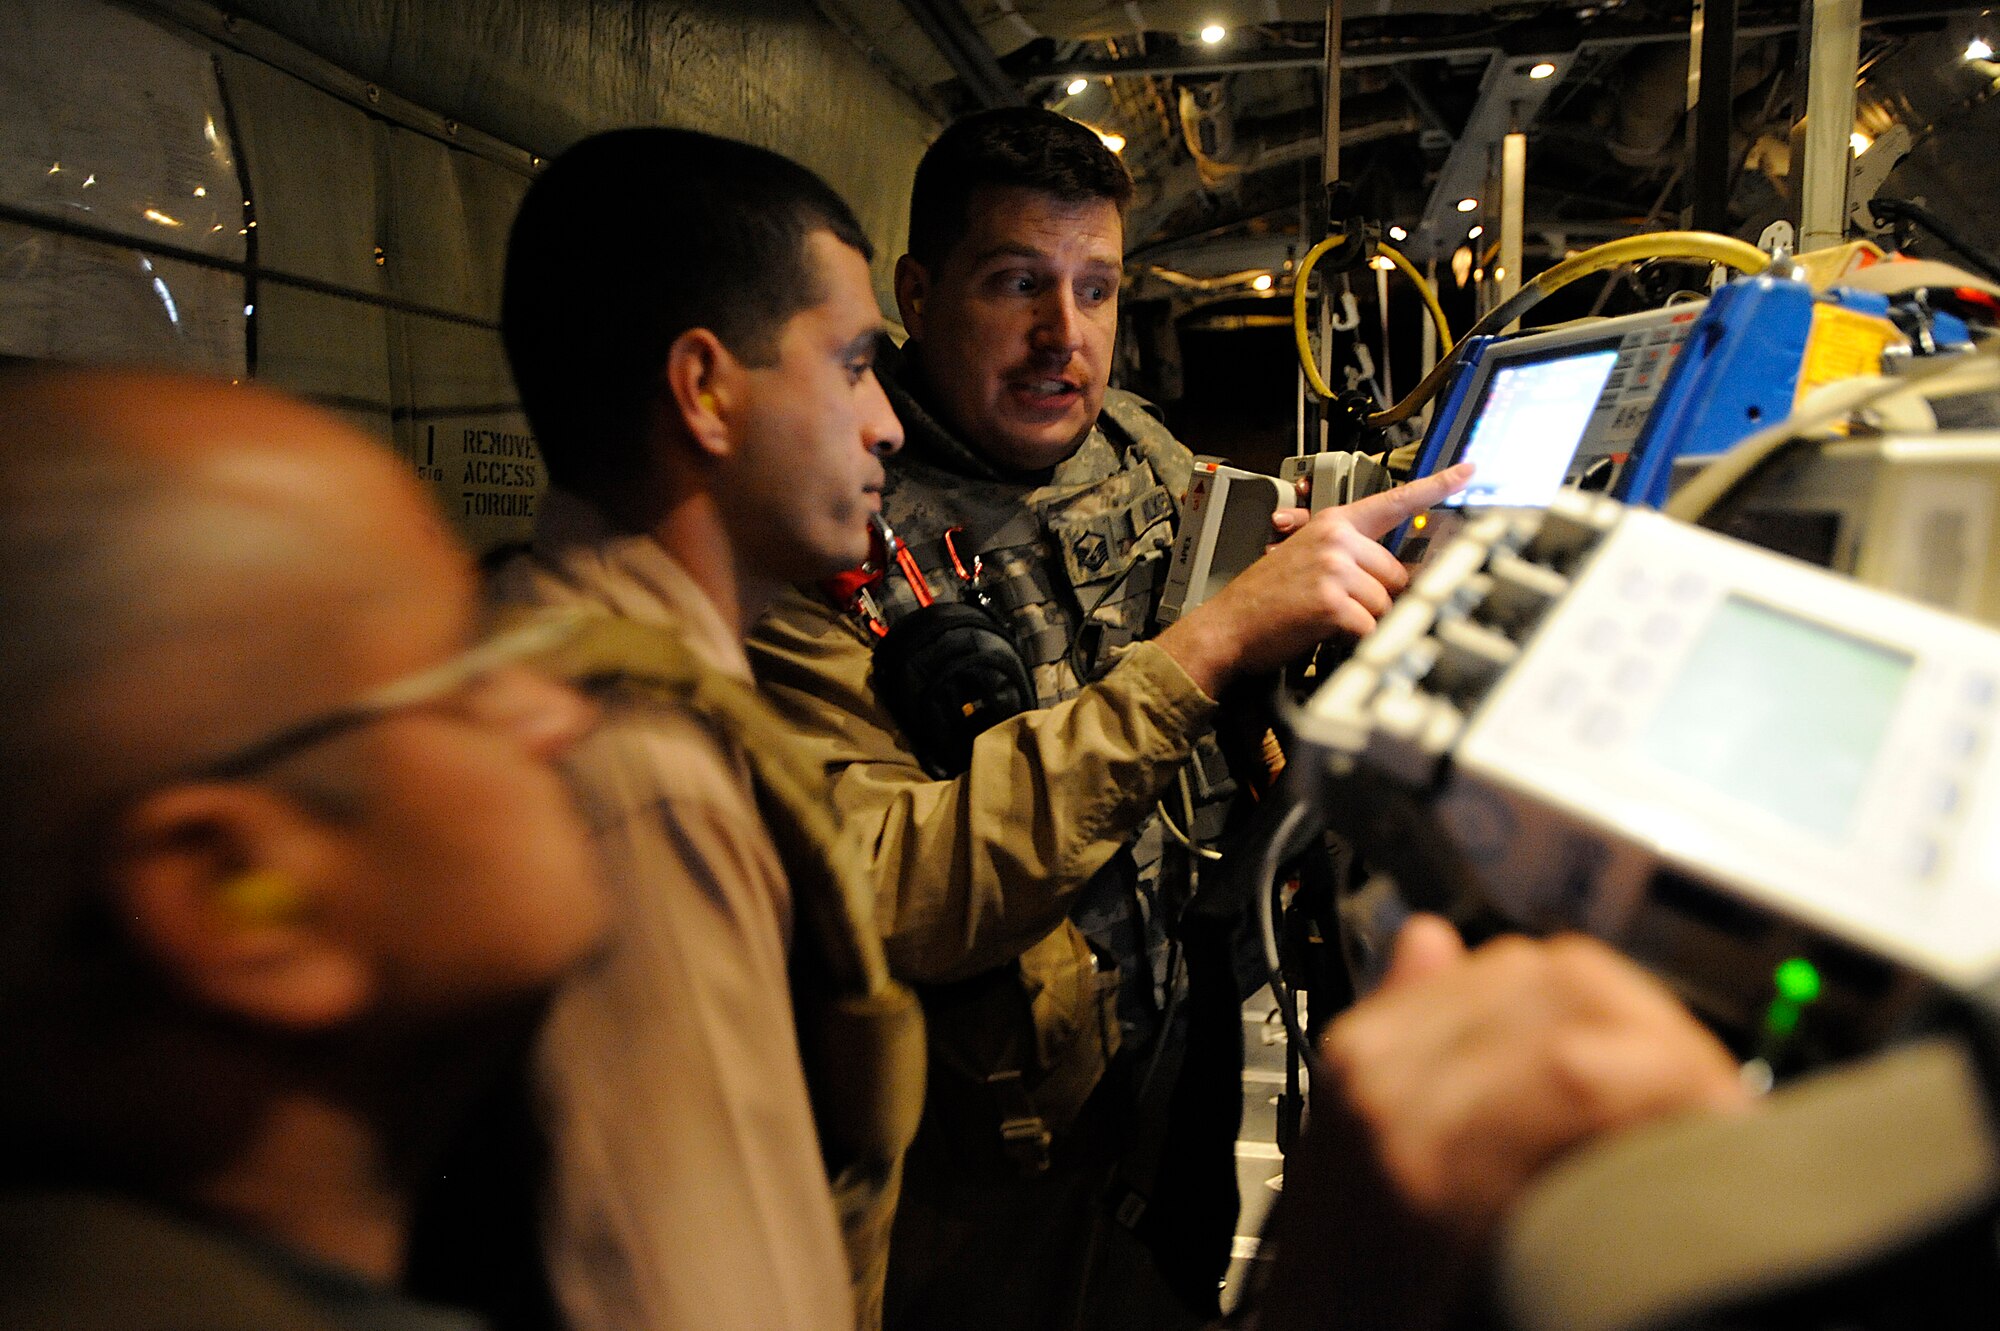 Master Sgt. Scott Wilkes (right) demonstrates a defibrillator and heart monitor to Iraqi air force Capt. (Dr.) Mohammed (middle) and Iraqi air force Maj. (Dr.) Abdul-Razaq during an aeromedical evacuation mission over Iraq Nov. 7. The two Iraqi doctors from Iraq's Ministry of Defense accompanied the U.S. Air Force mission to study aeromedical evacuation procedures so that they can establish an aeromedical evacuation service for the Iraqi air force. Wilkes, a charge medical technician with the 332nd Expeditionary Aeromedical Evacuation Flight, is deployed from McGuire Air Force Base, N.J. (U.S. Air Force photo/Airman 1st Class Jason Epley)